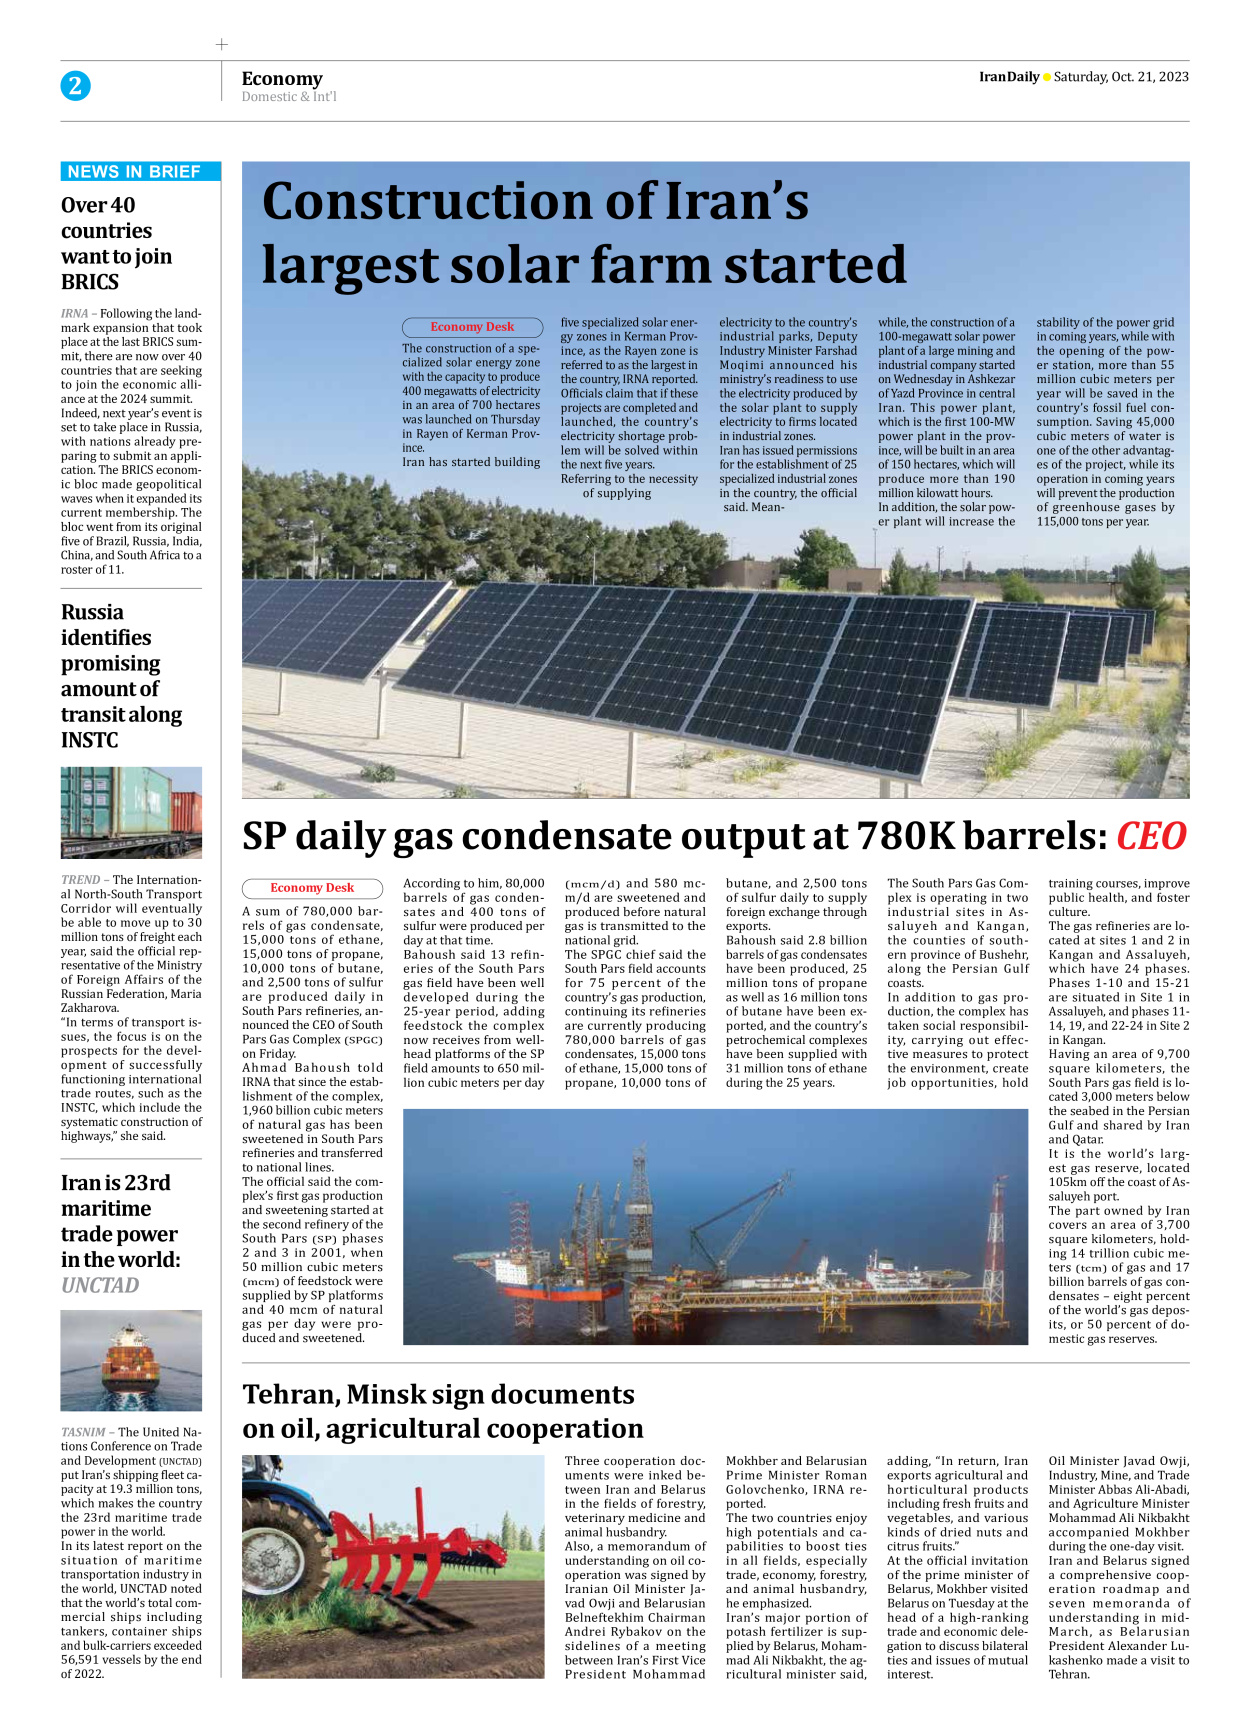 Iran Daily - Number Seven Thousand Four Hundred and Thirteen - 21 October 2023 - Page 2